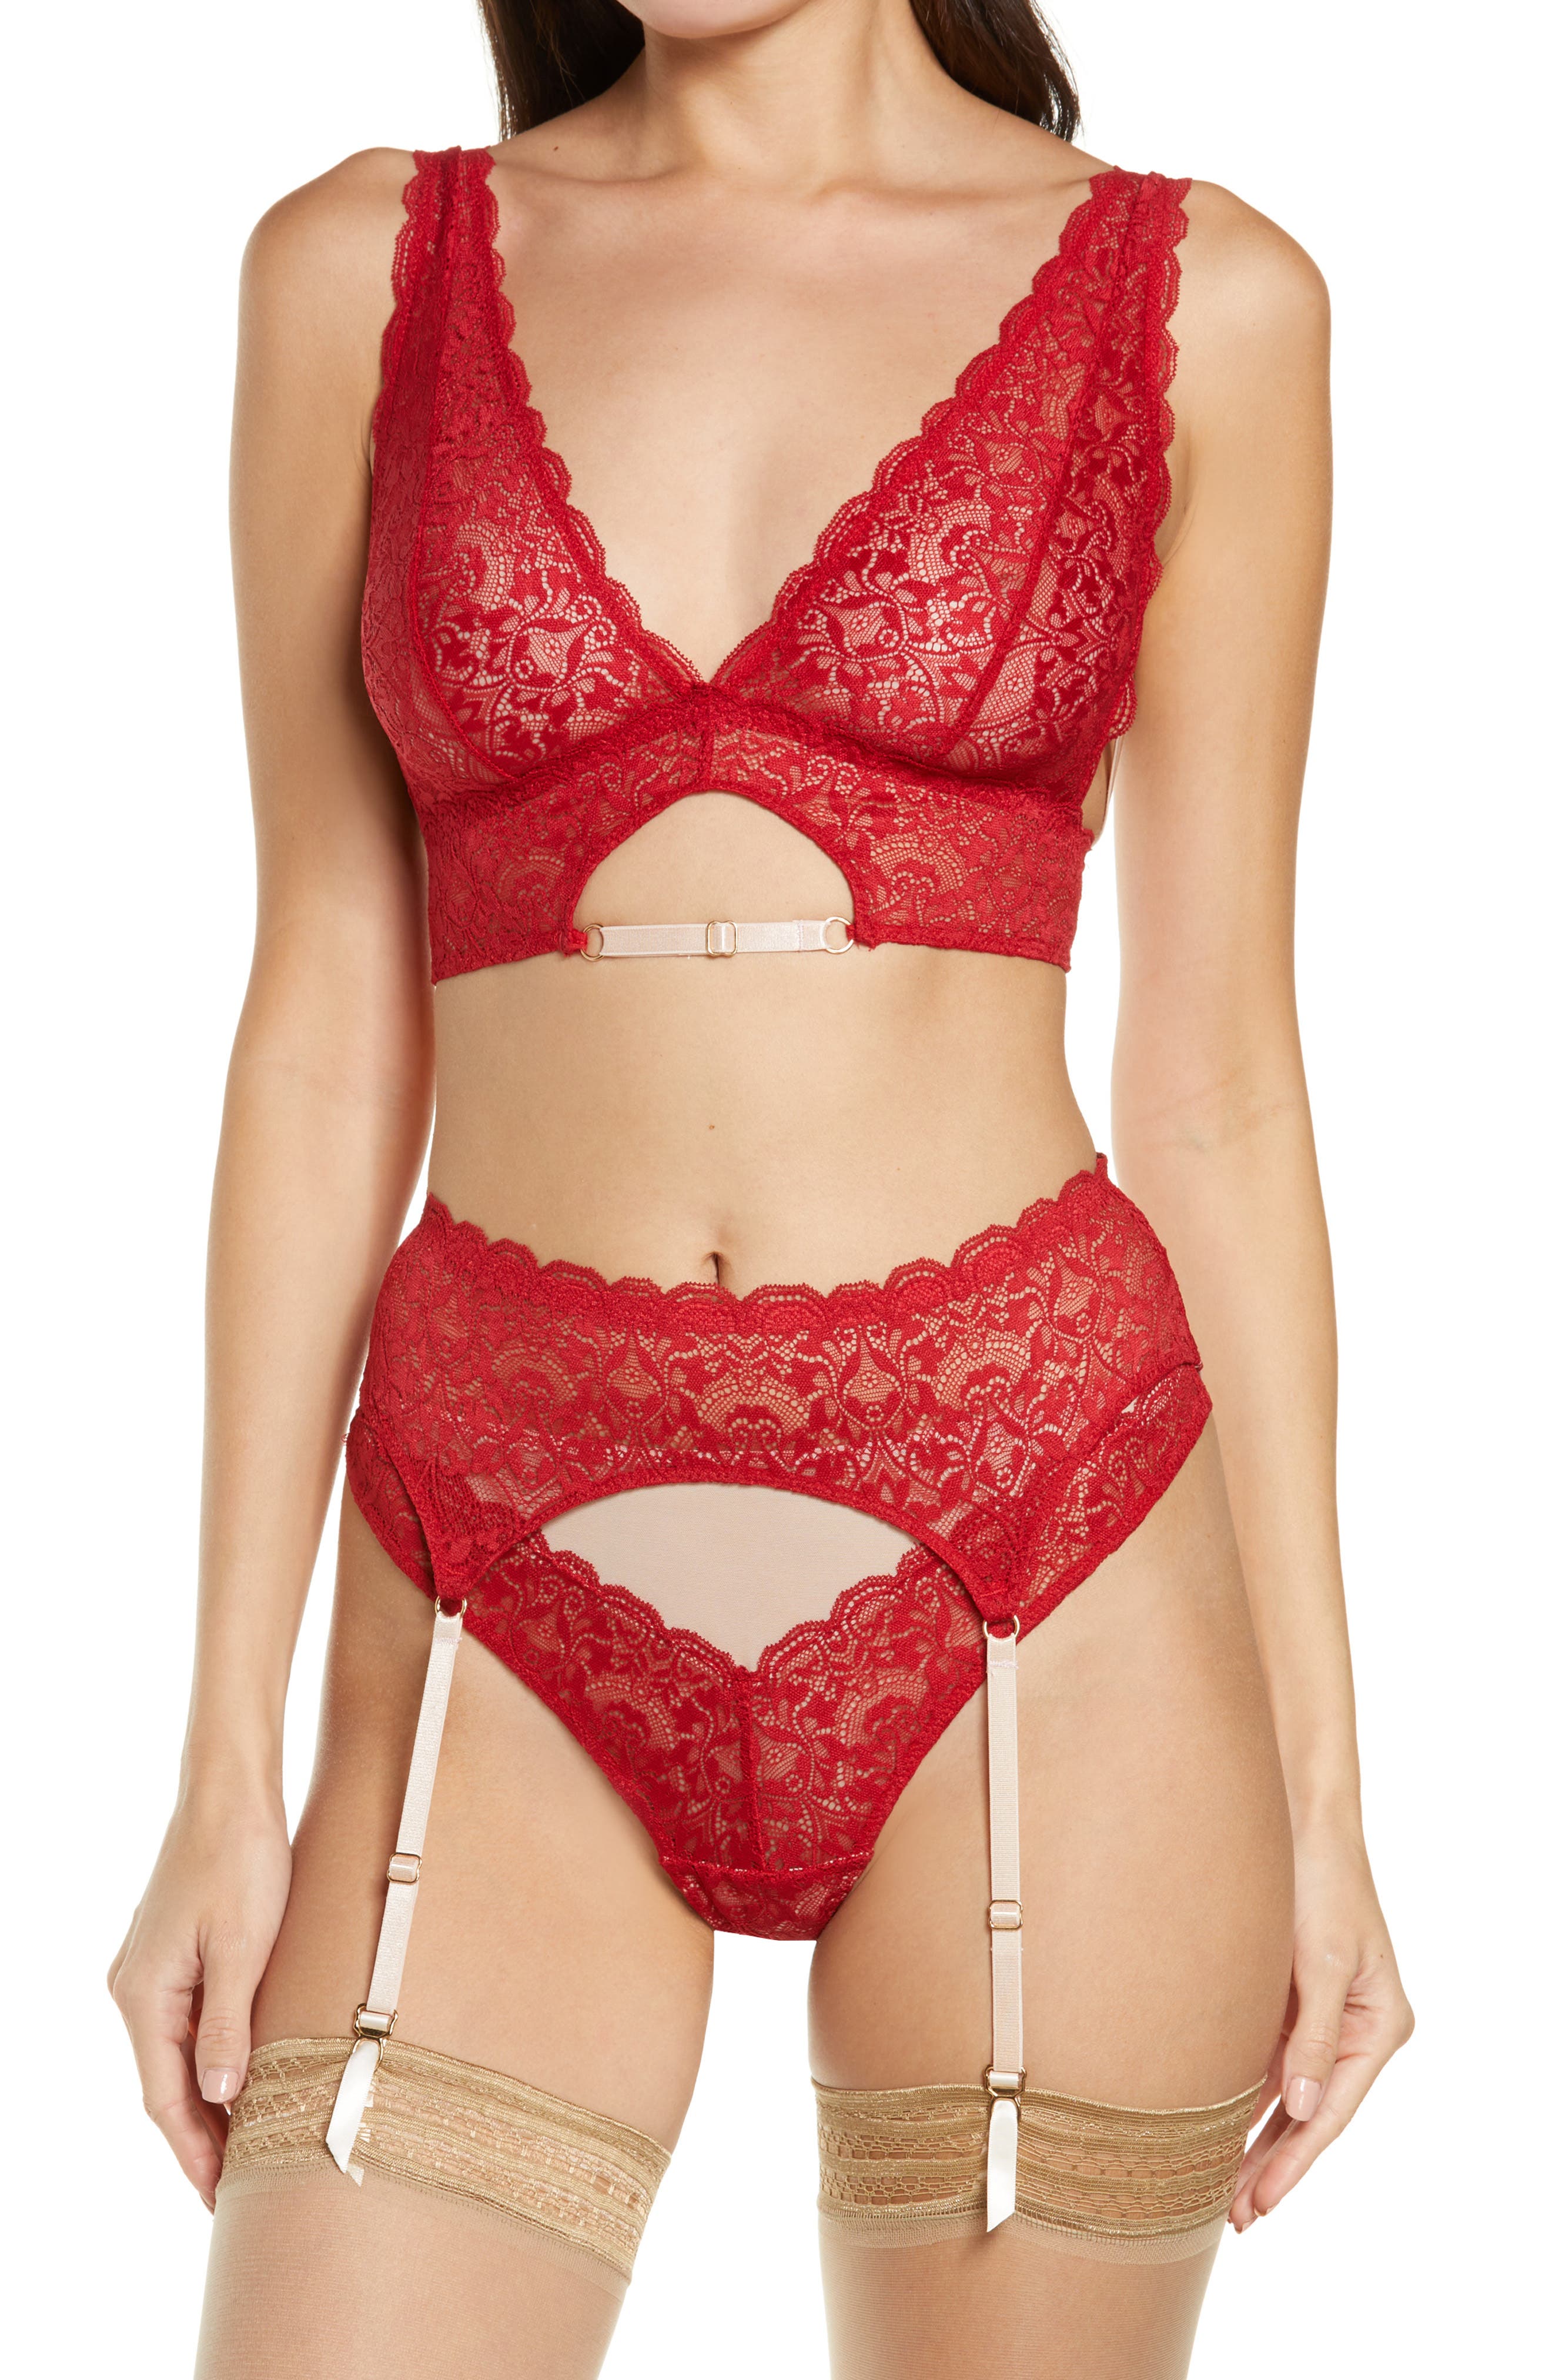 Honeydew Intimates Nicollette Lace Thong in Vixen